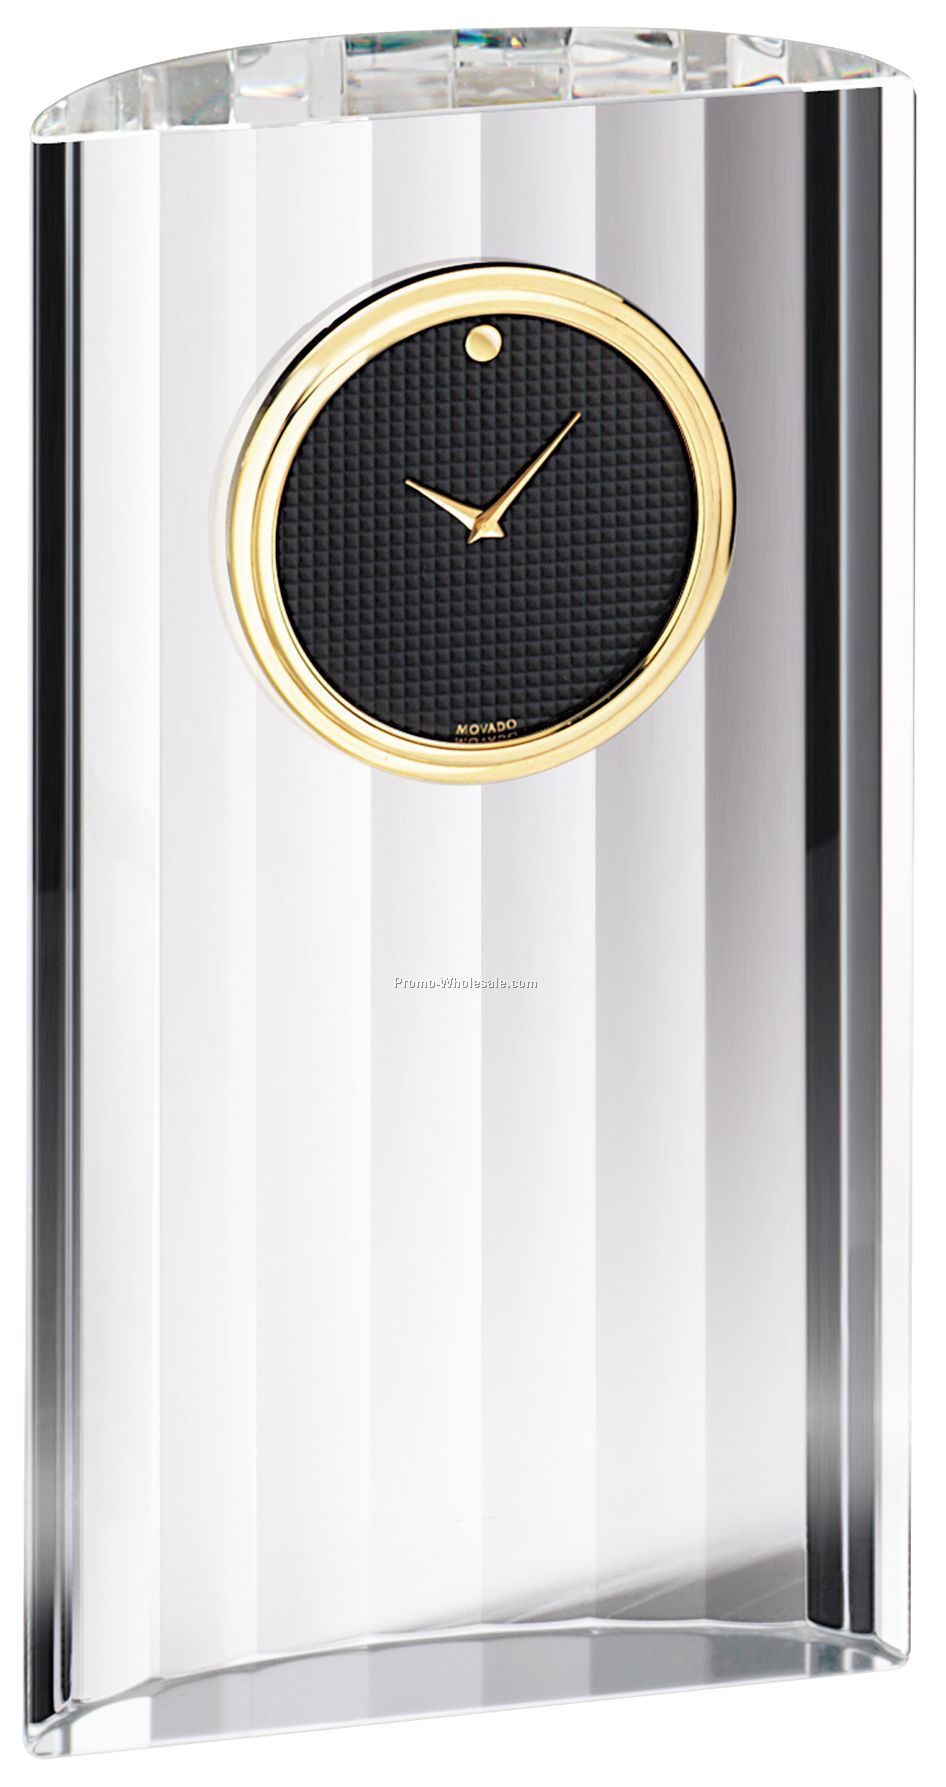 Movado Black Museum Dial Crystal Clock W/ Gold Accents